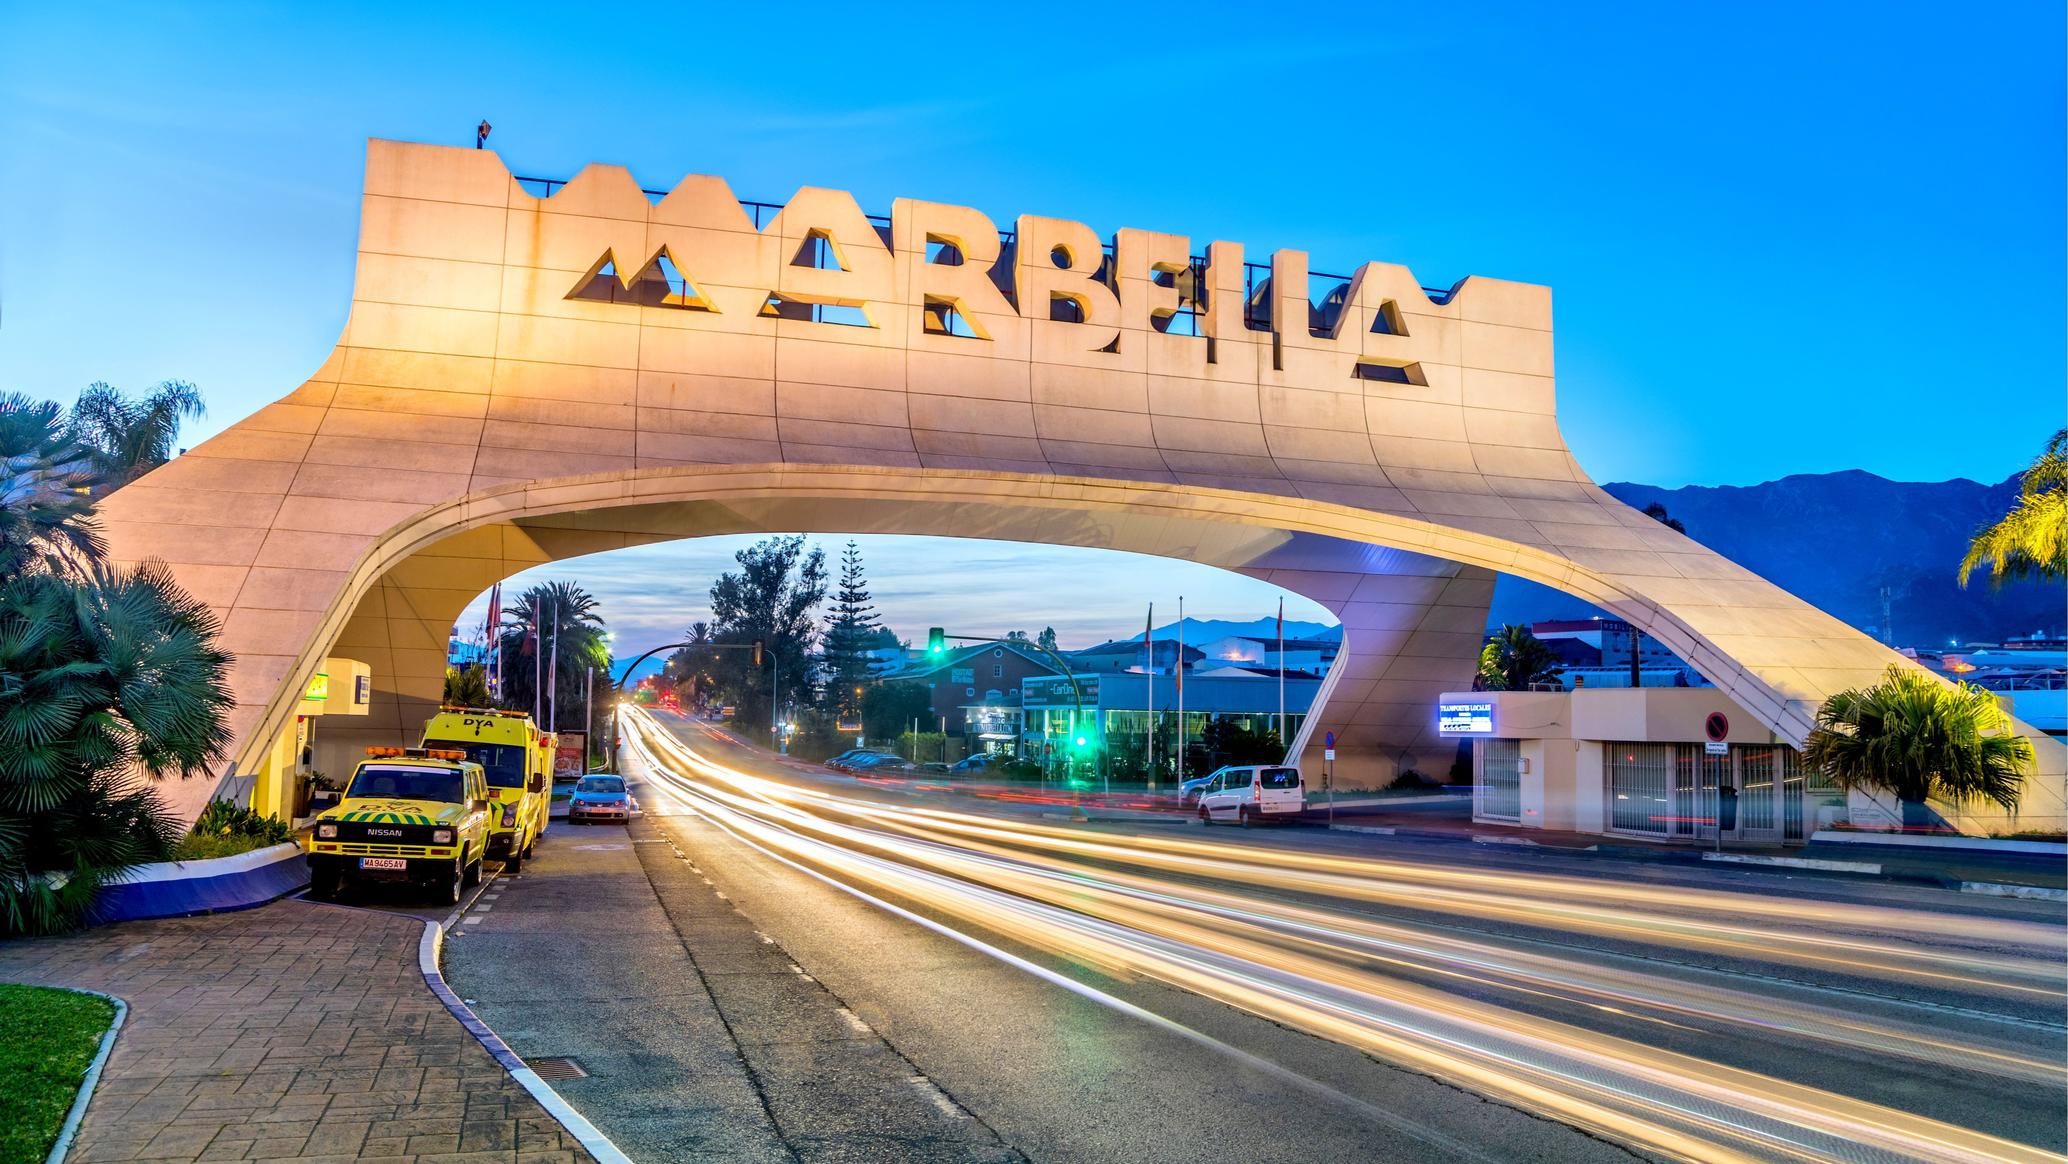 An overview of Marbella